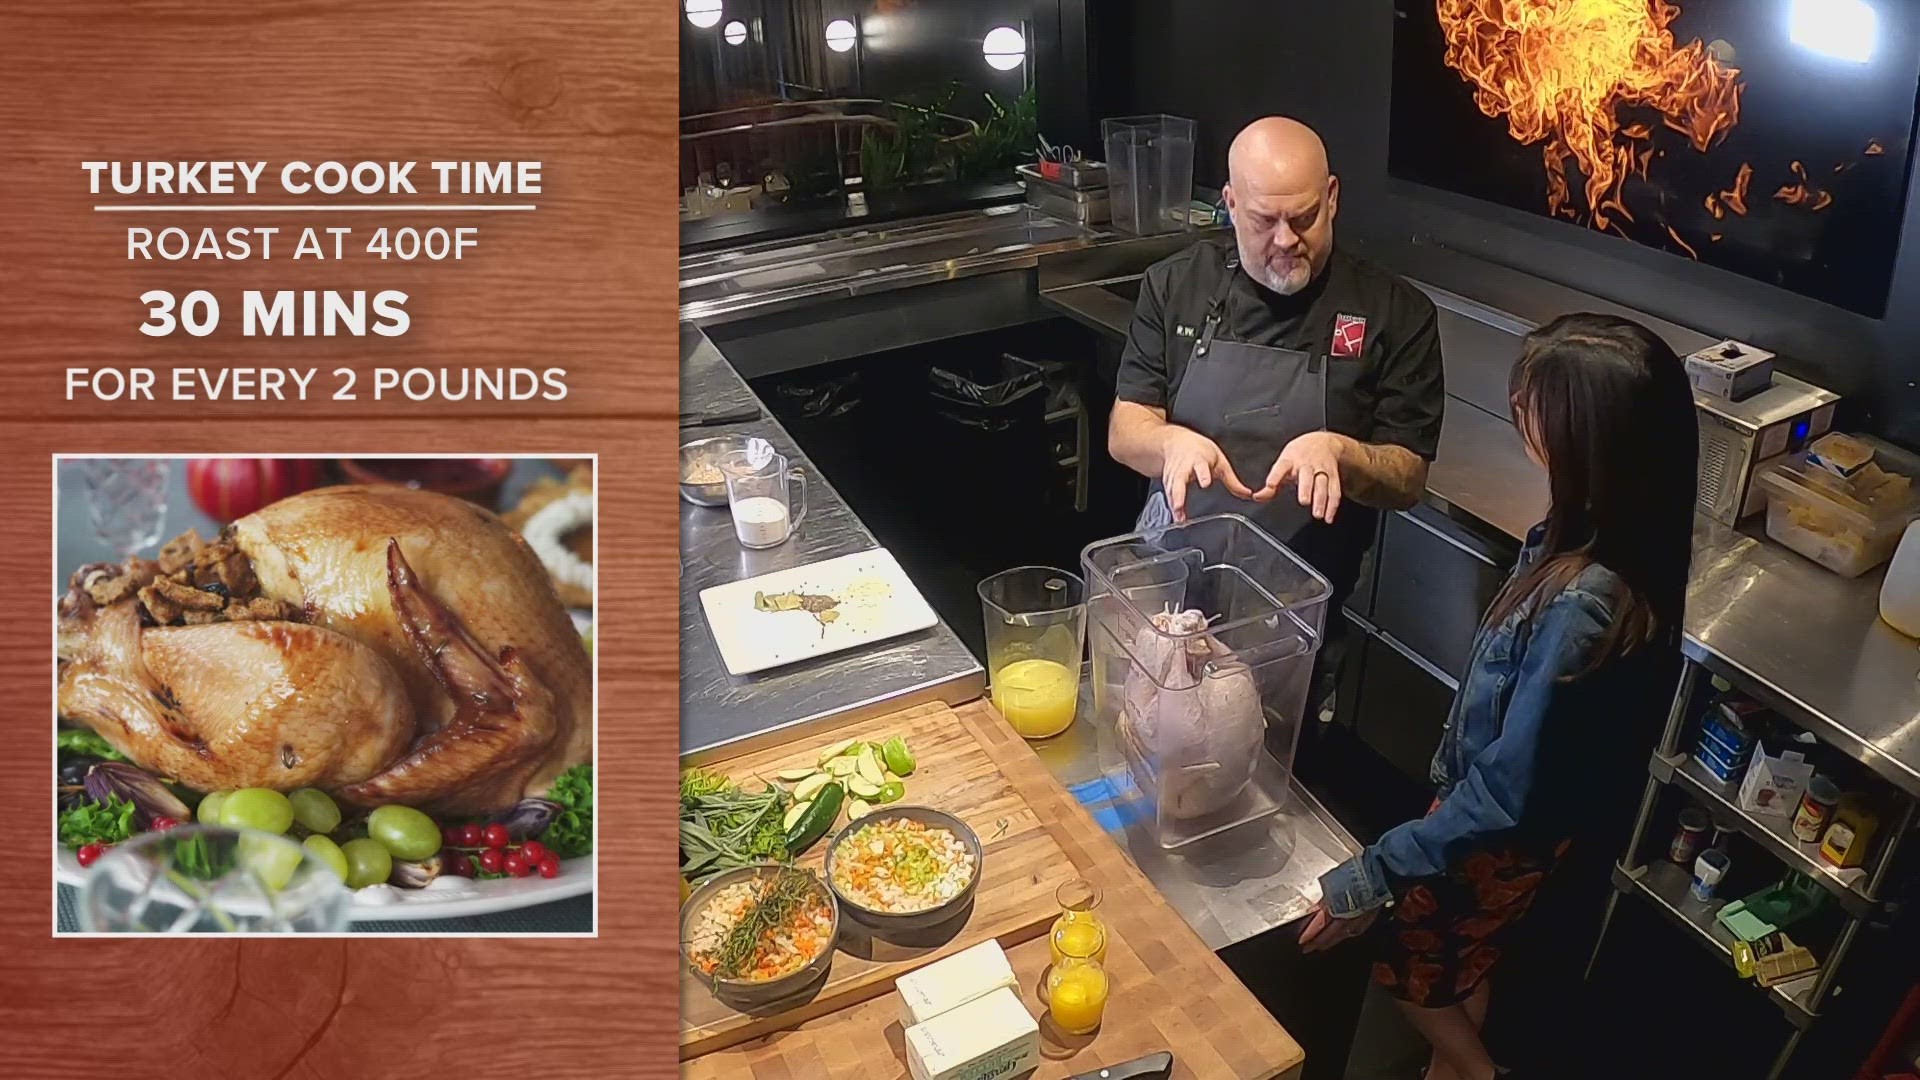 Are you cooking the Thanksgiving turkey this year? Here's some expert prep advice from Cleveland chef Rocco Whalen.